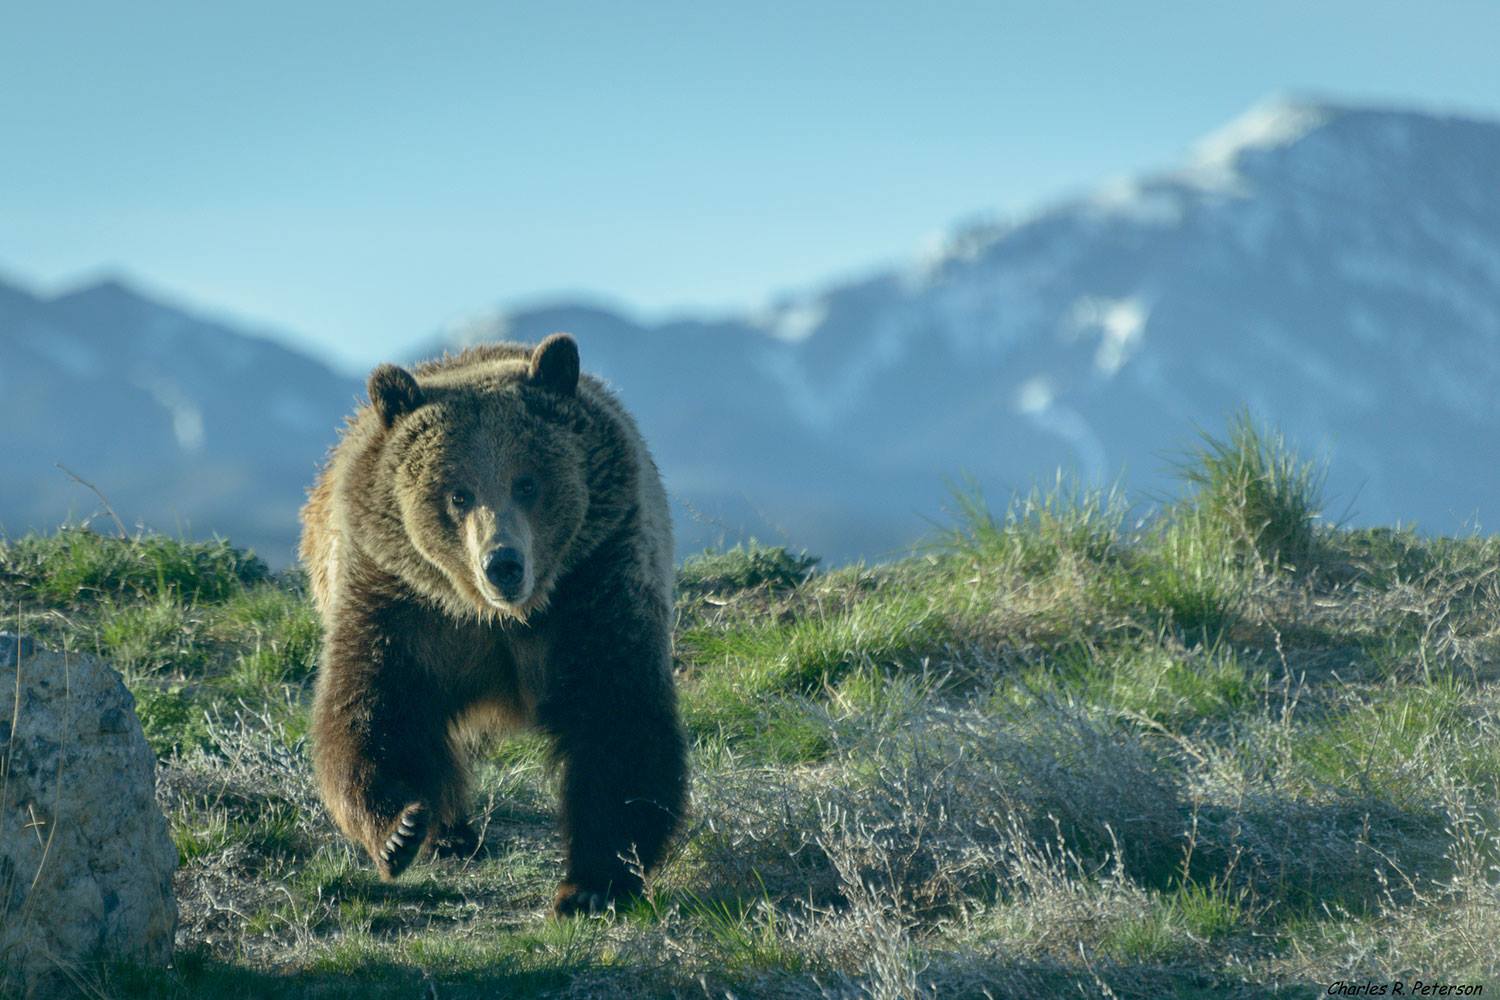 What's the Difference Between Grizzly Bears and Brown Bears?